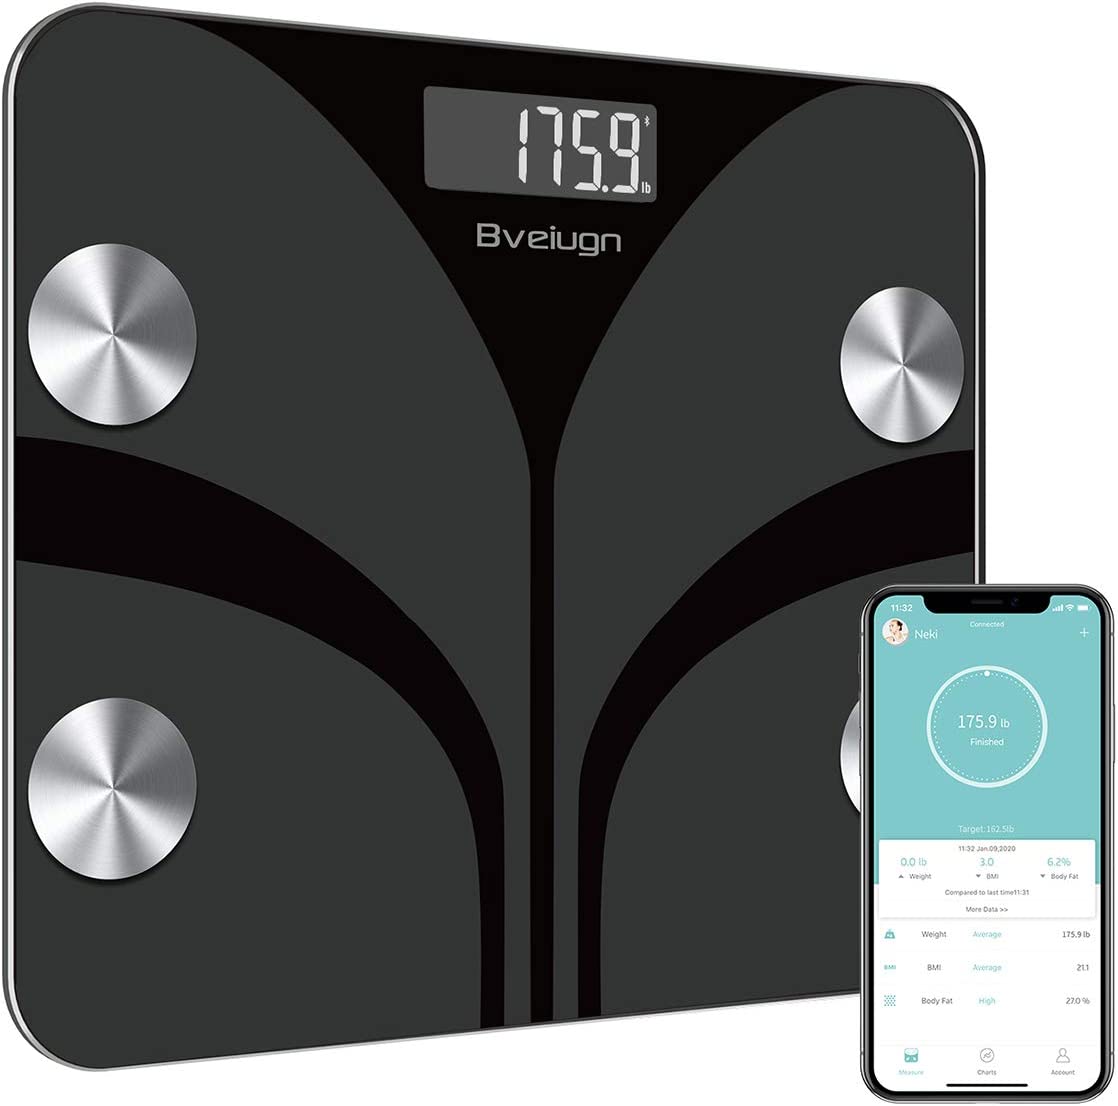 Scale for Body Weight, Bveiugn Digital Bathroom Weight Scales for People, Weighing Machine for Fat Water Muscle BMI, Body Composition Monitor Health Analyzer with Smartphone App, 400lb